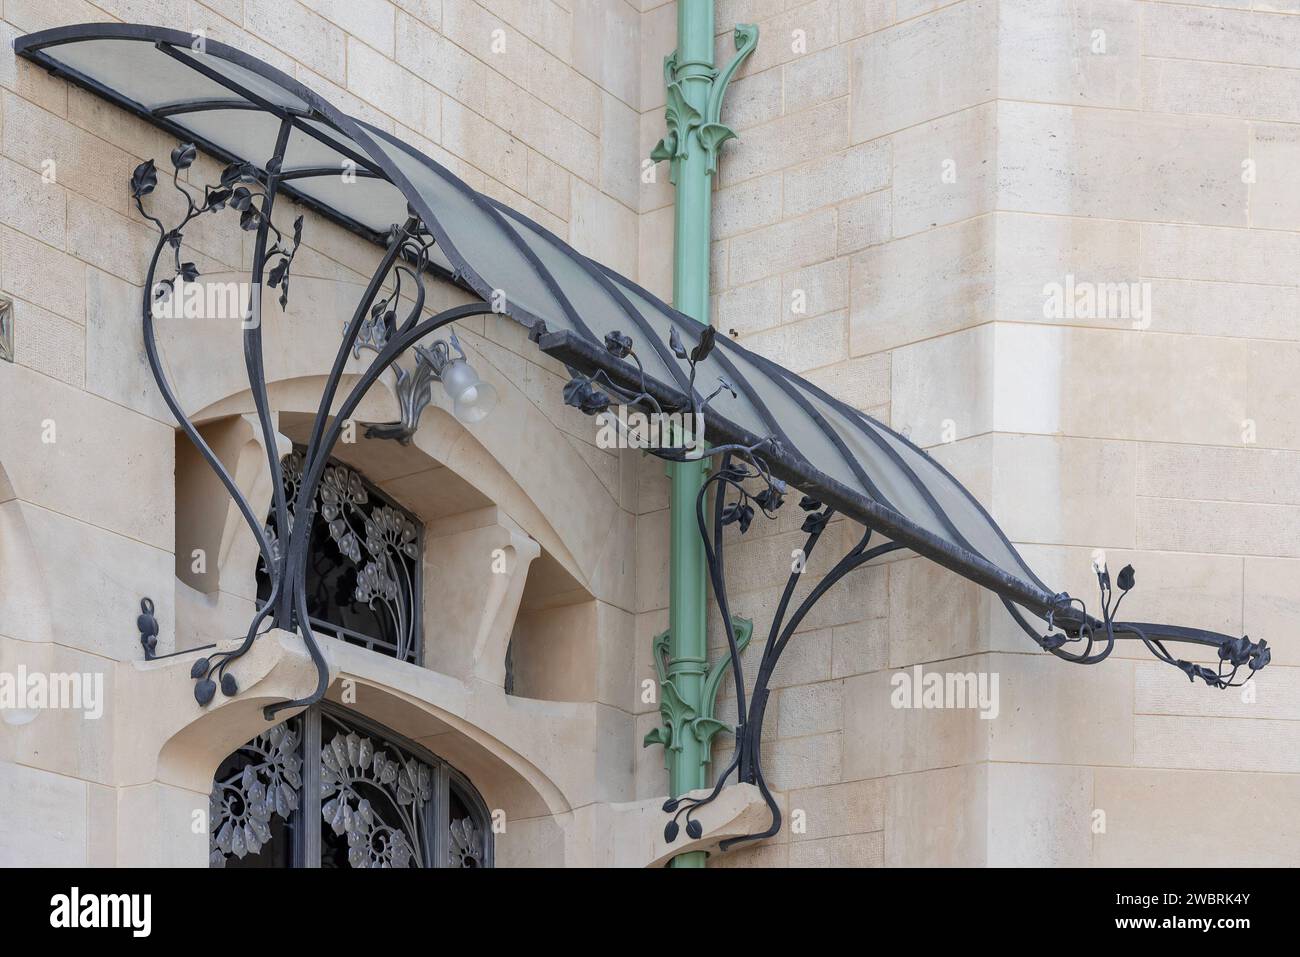 Nancy, France - Focus on the entrance on the Art Nouveau Villa Jika build in 1902 with its numerous decorative ironworks with plant motifs. Stock Photo